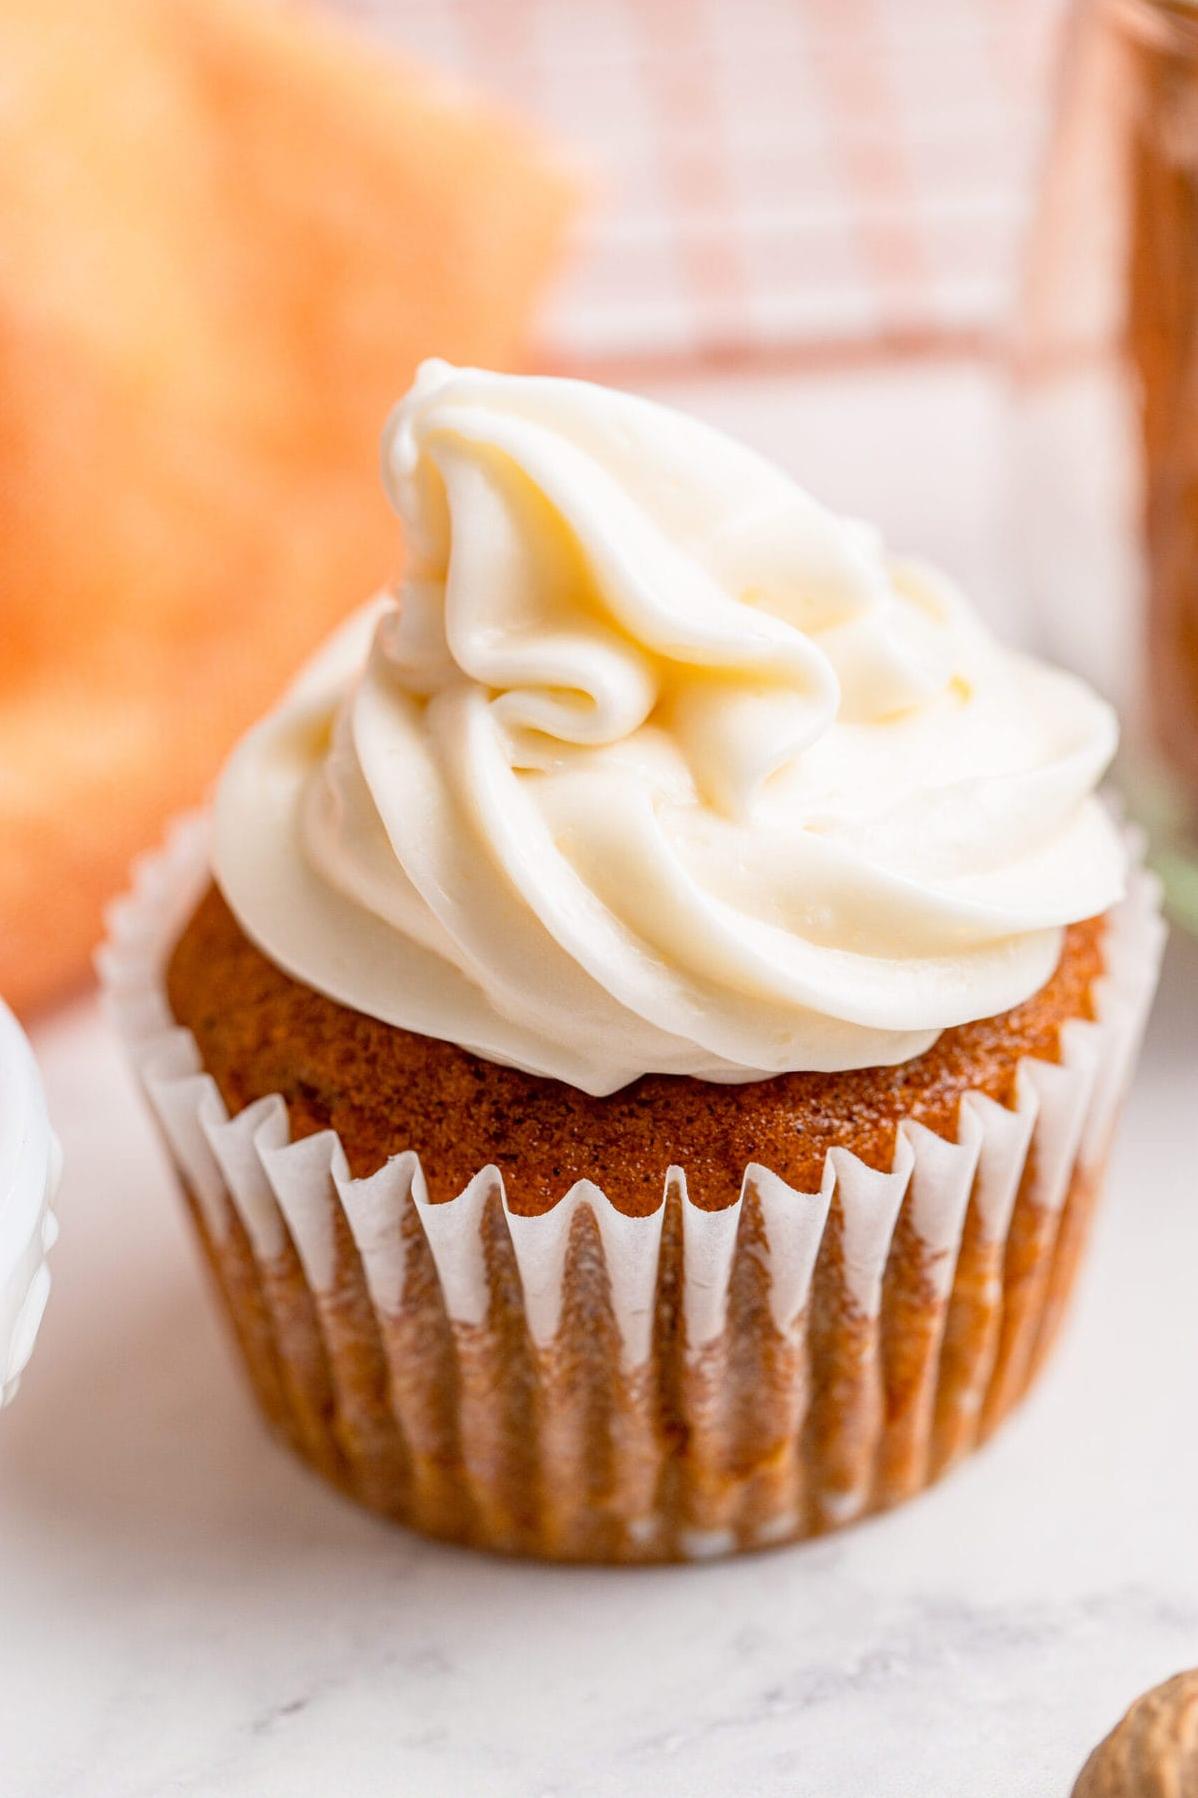  These cupcakes are a great way to sneak in some vegetables into your dessert.